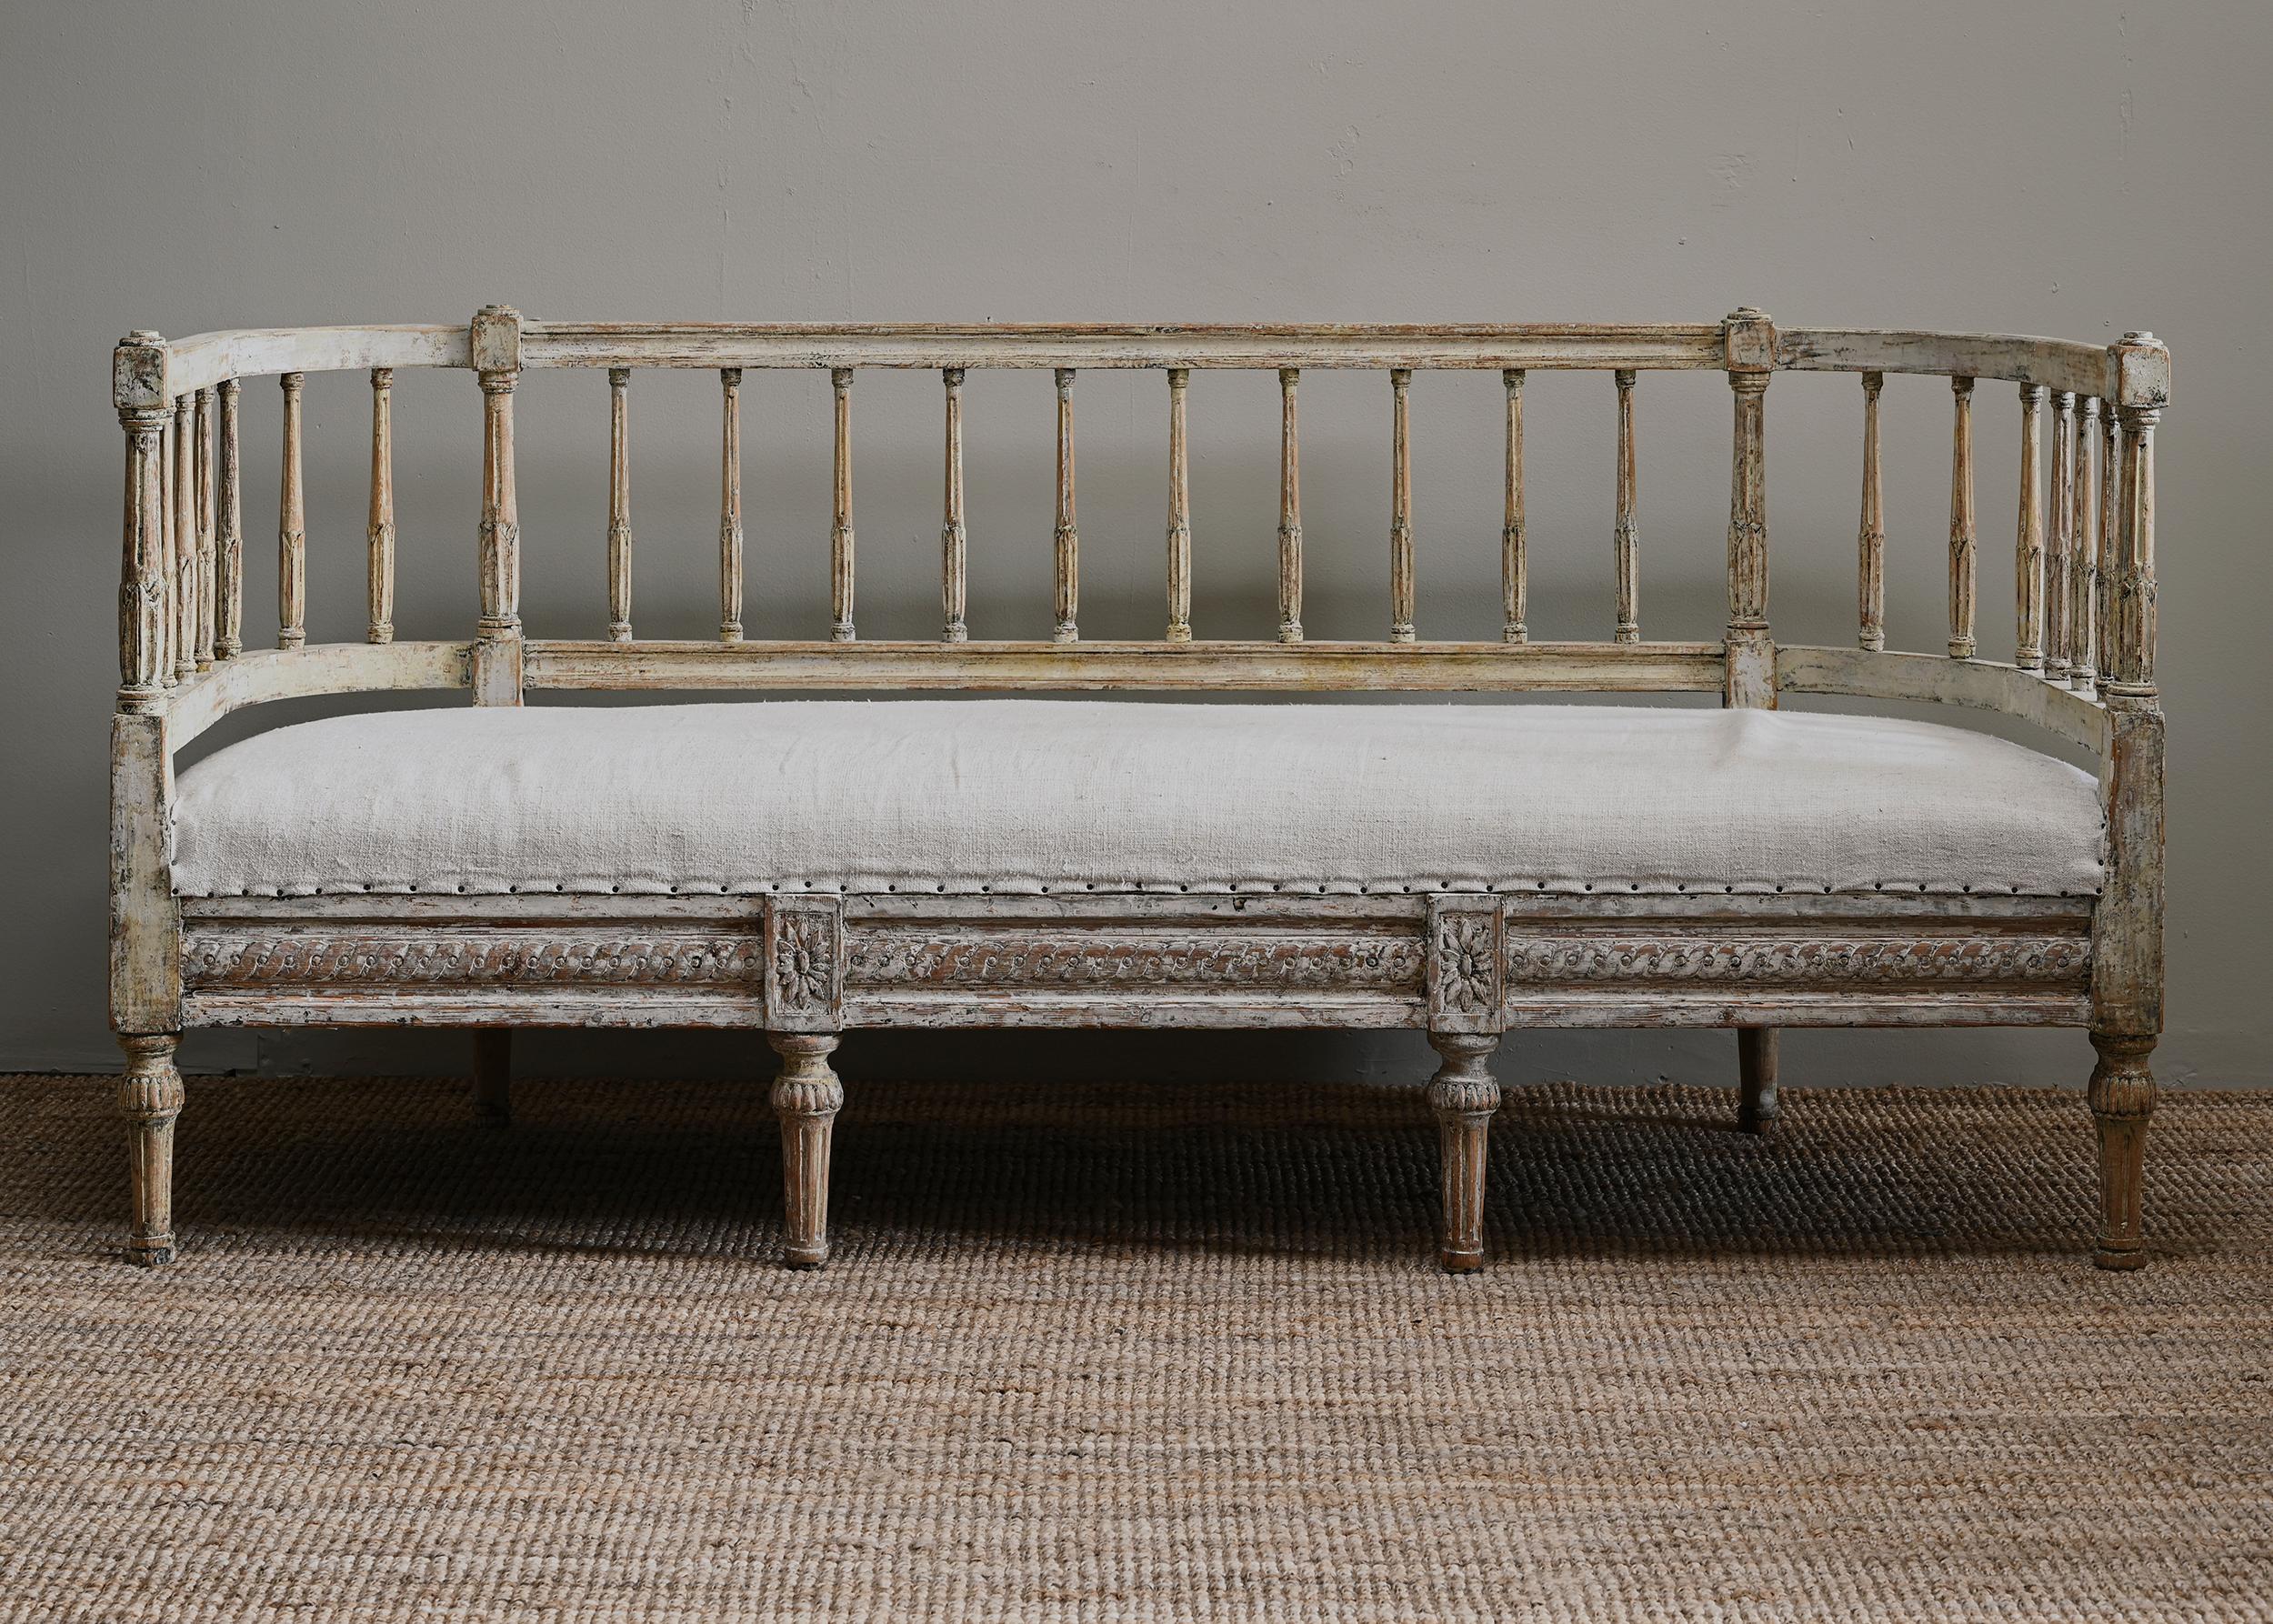 Fine 19th century provincial Gustavian sofa with an unusual curved back rest in its original finish with retouches. Ca 1810, Sweden. Newly upholstered in linen.